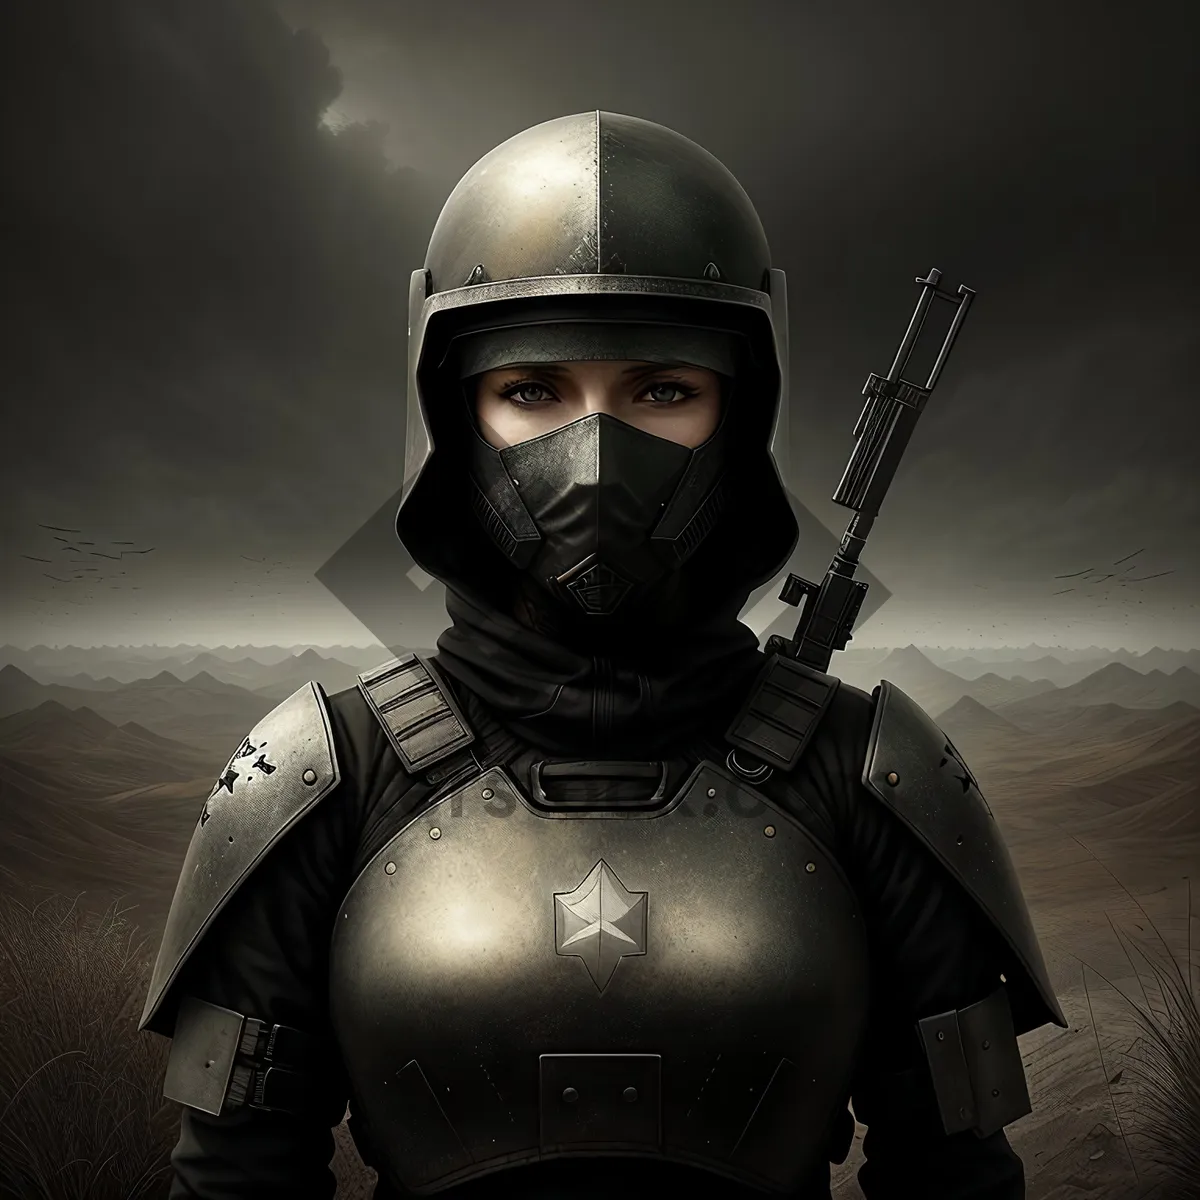 Picture of Armored Male Soldier with Helmet and Shield